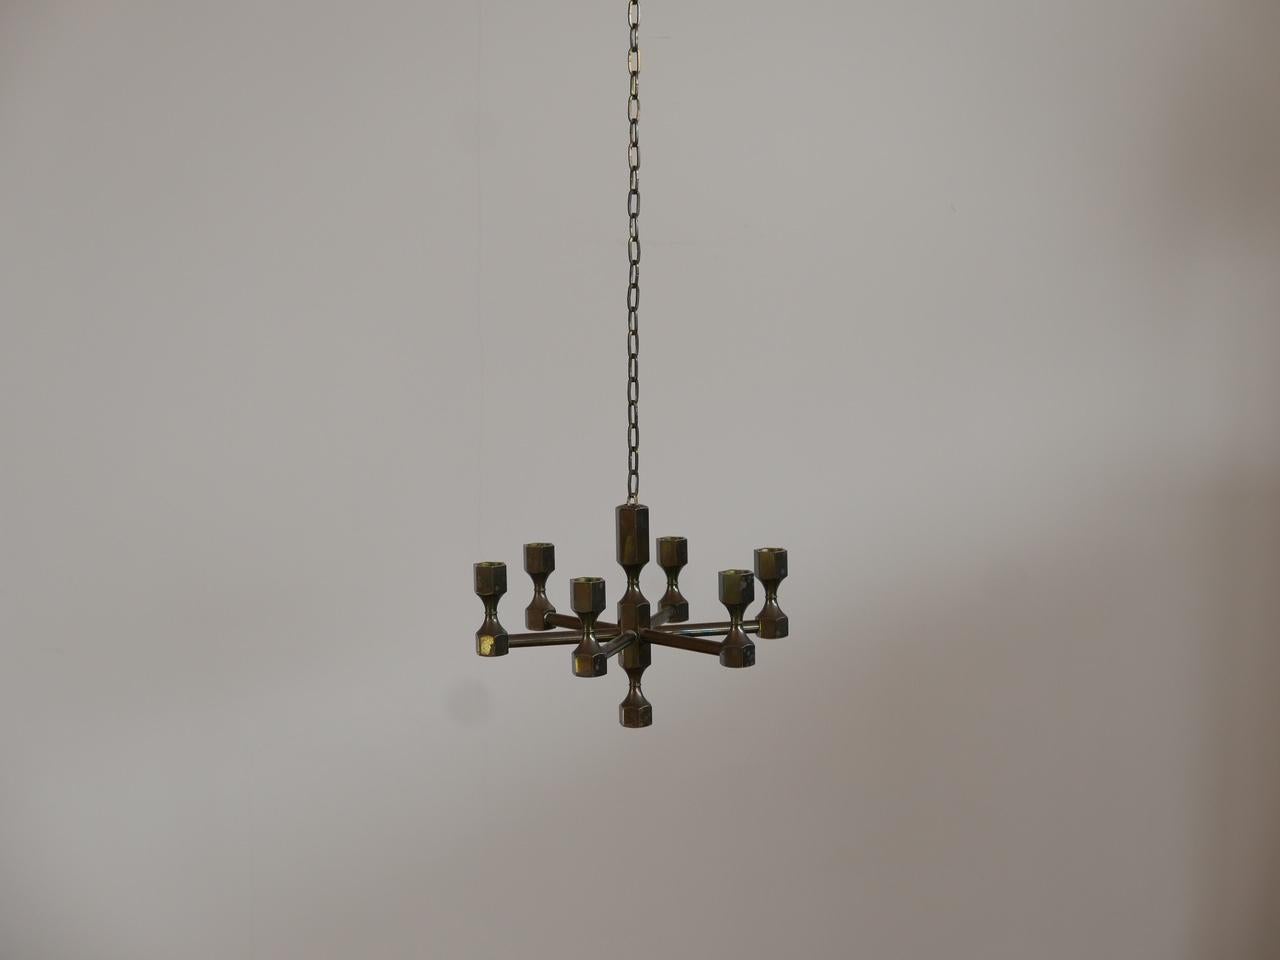 An unusual hanging candelabra likely made by Lars Bergsten for Gusum Metallslojden AB, Sweden. 

Nickel-plated brass.

Heavy and good quality.

Candles not included,

circa 1970s, Sweden.

Dimensions: 28 diameter x 20 height x 140 total